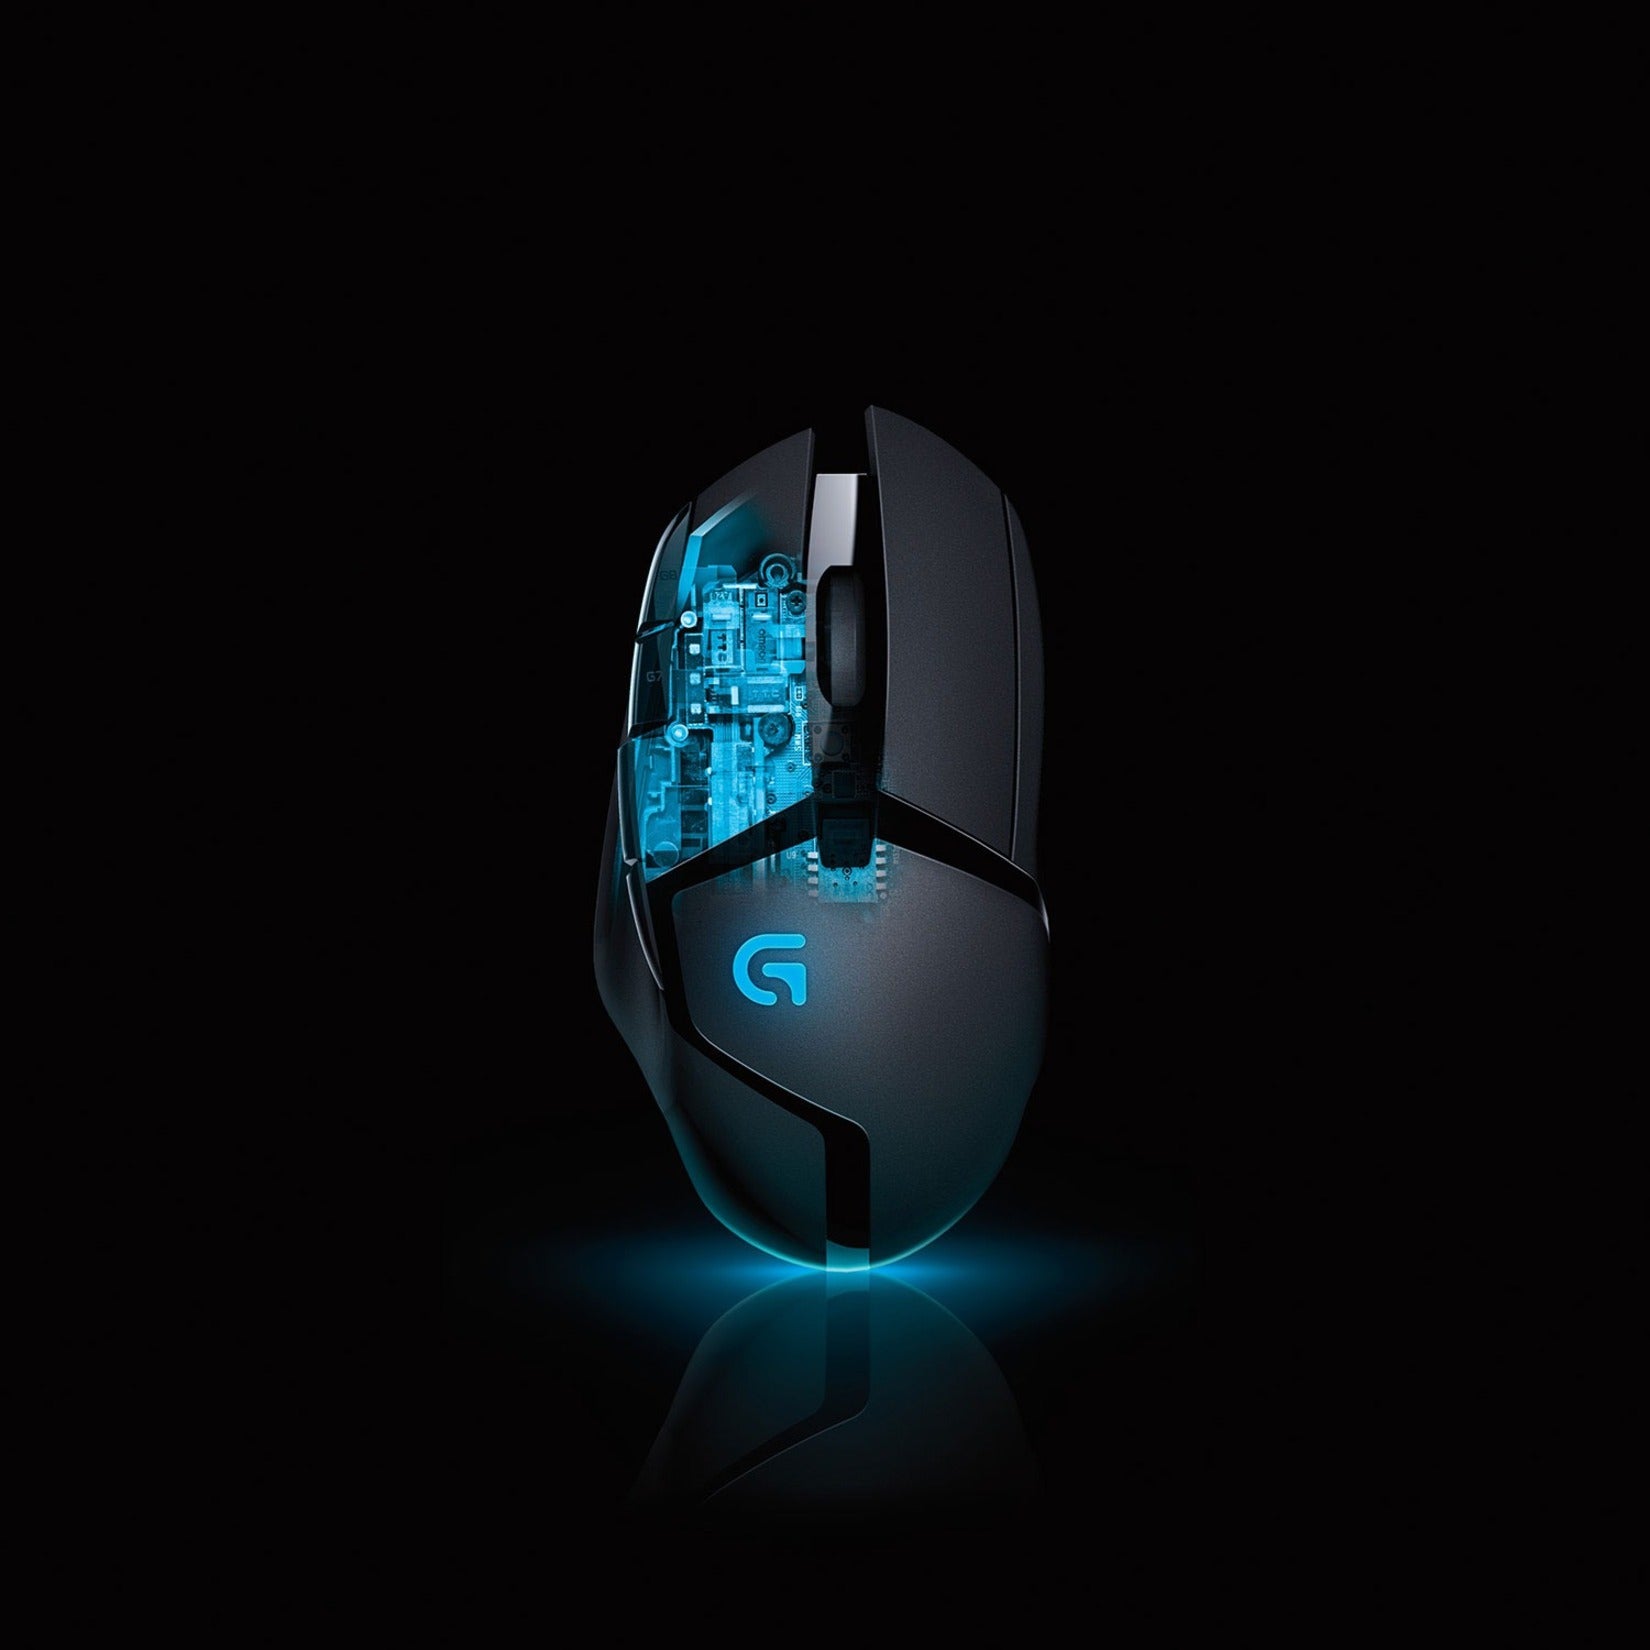 Logitech 910-004069 G402 Hyperion Fury Ultra-Fast FPS Gaming Mouse, Lightweight with 4000 dpi Resolution